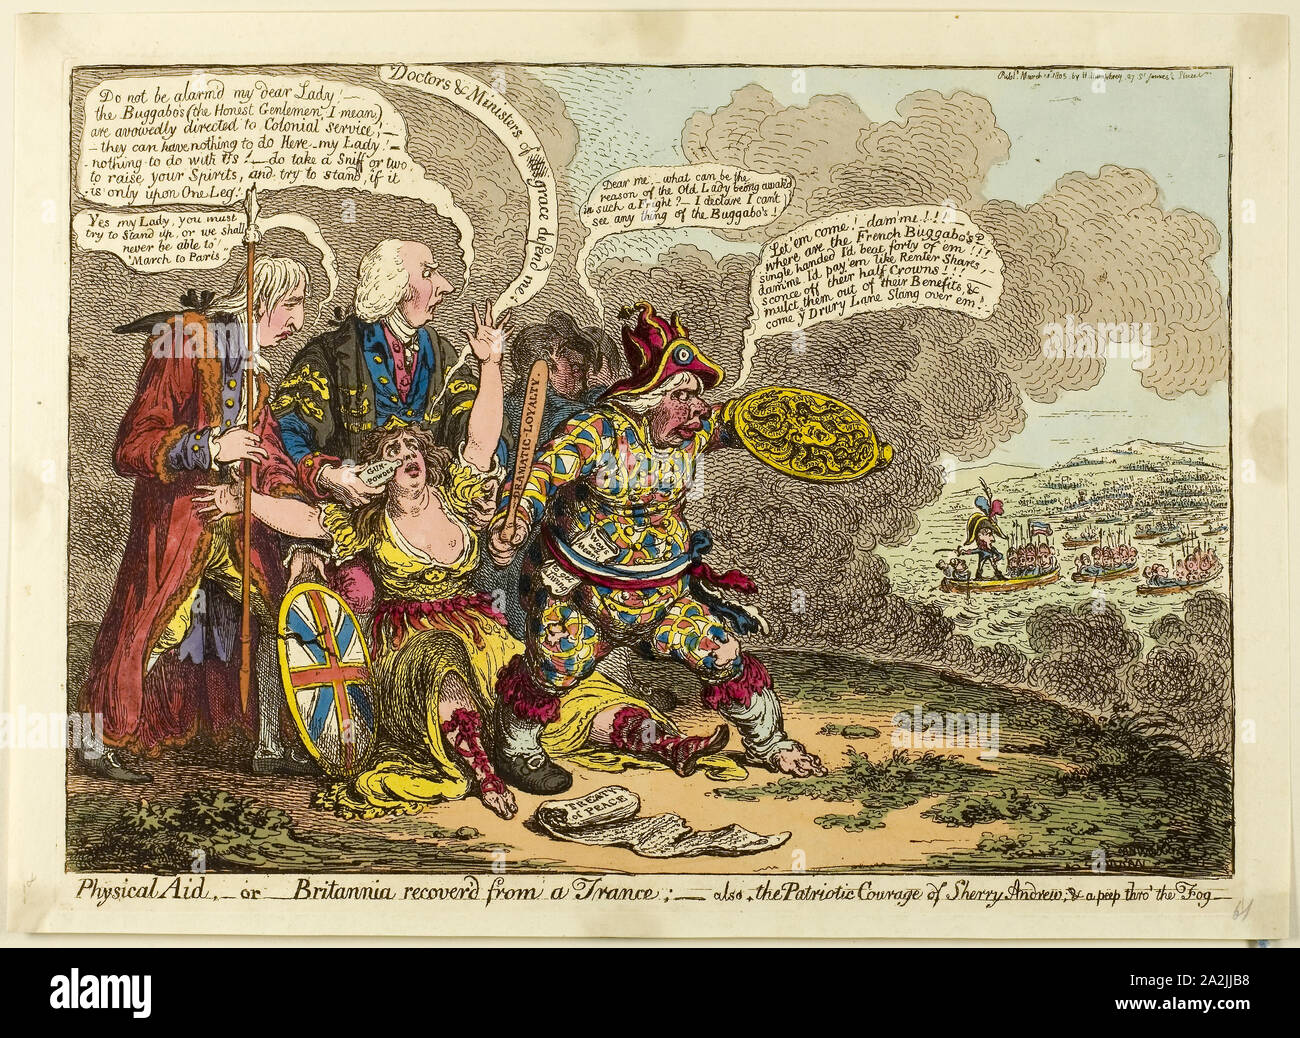 Physical Aid, or Britannia Recover’d from a Trance!, published March 14, 1803, James Gillray (English, 1756-1815), published by Hannah Humphrey (English, c. 1745-1818), England, Hand-colored etching on paper, 250 × 359 mm (image), 262 × 362 mm (plate), 284 × 391 mm (sheet Stock Photo